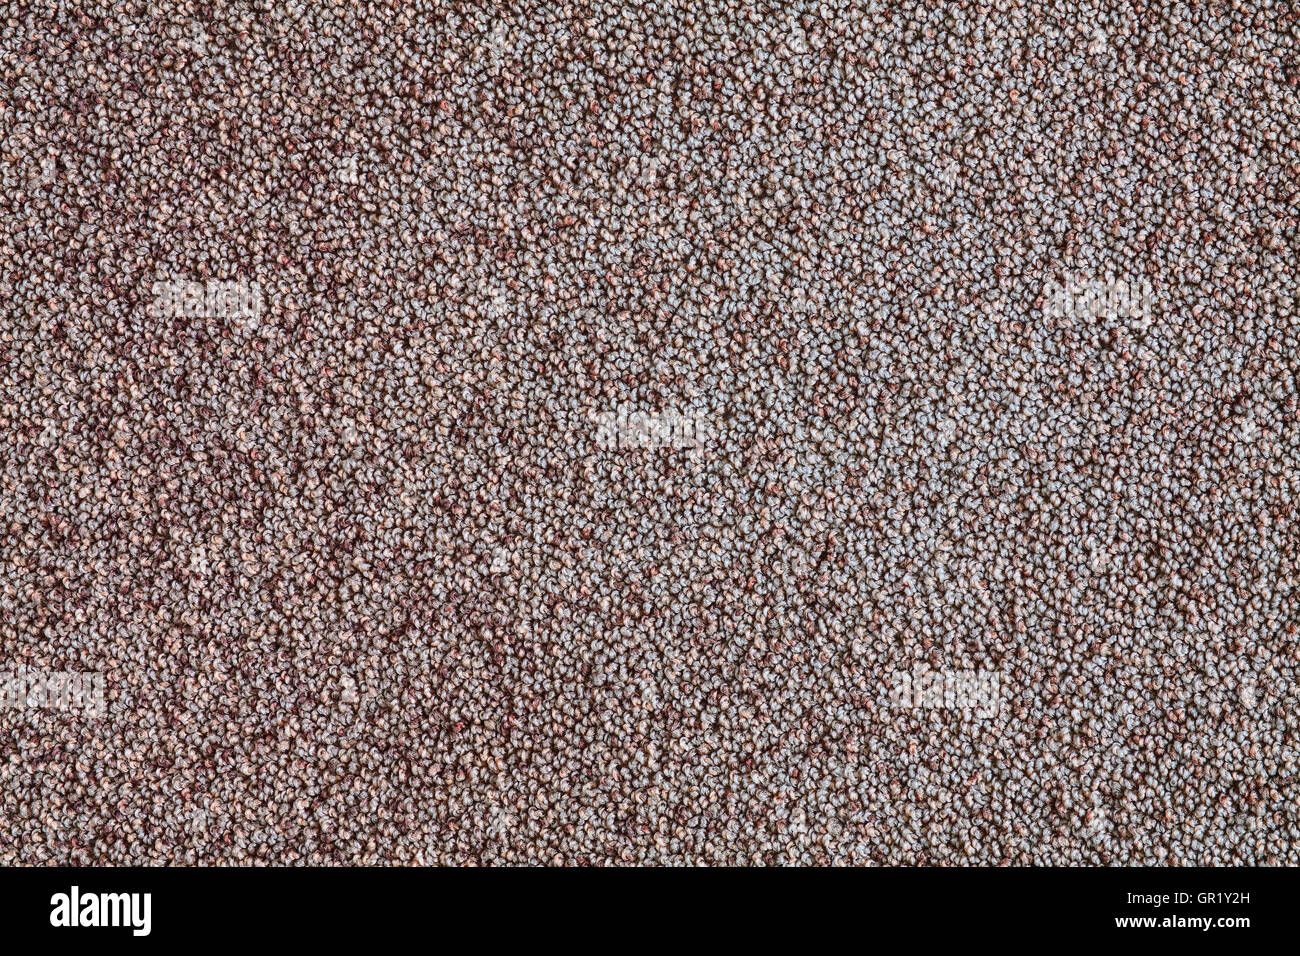 High quality close up picture of a carpet fabric texture. Stock Photo